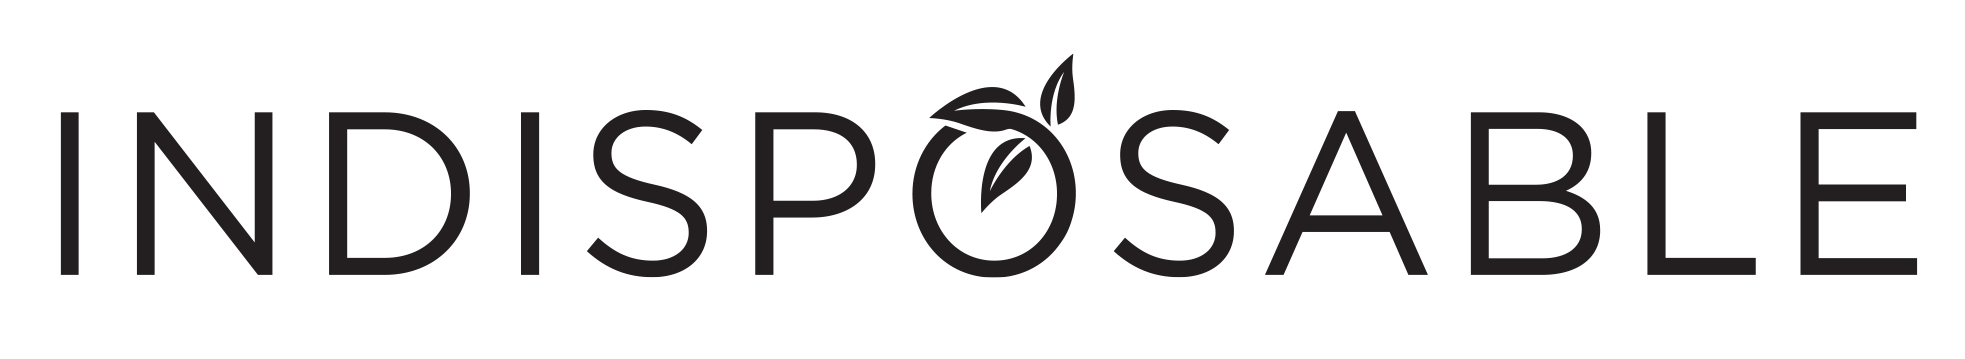 Indisposable Eco Store Logo